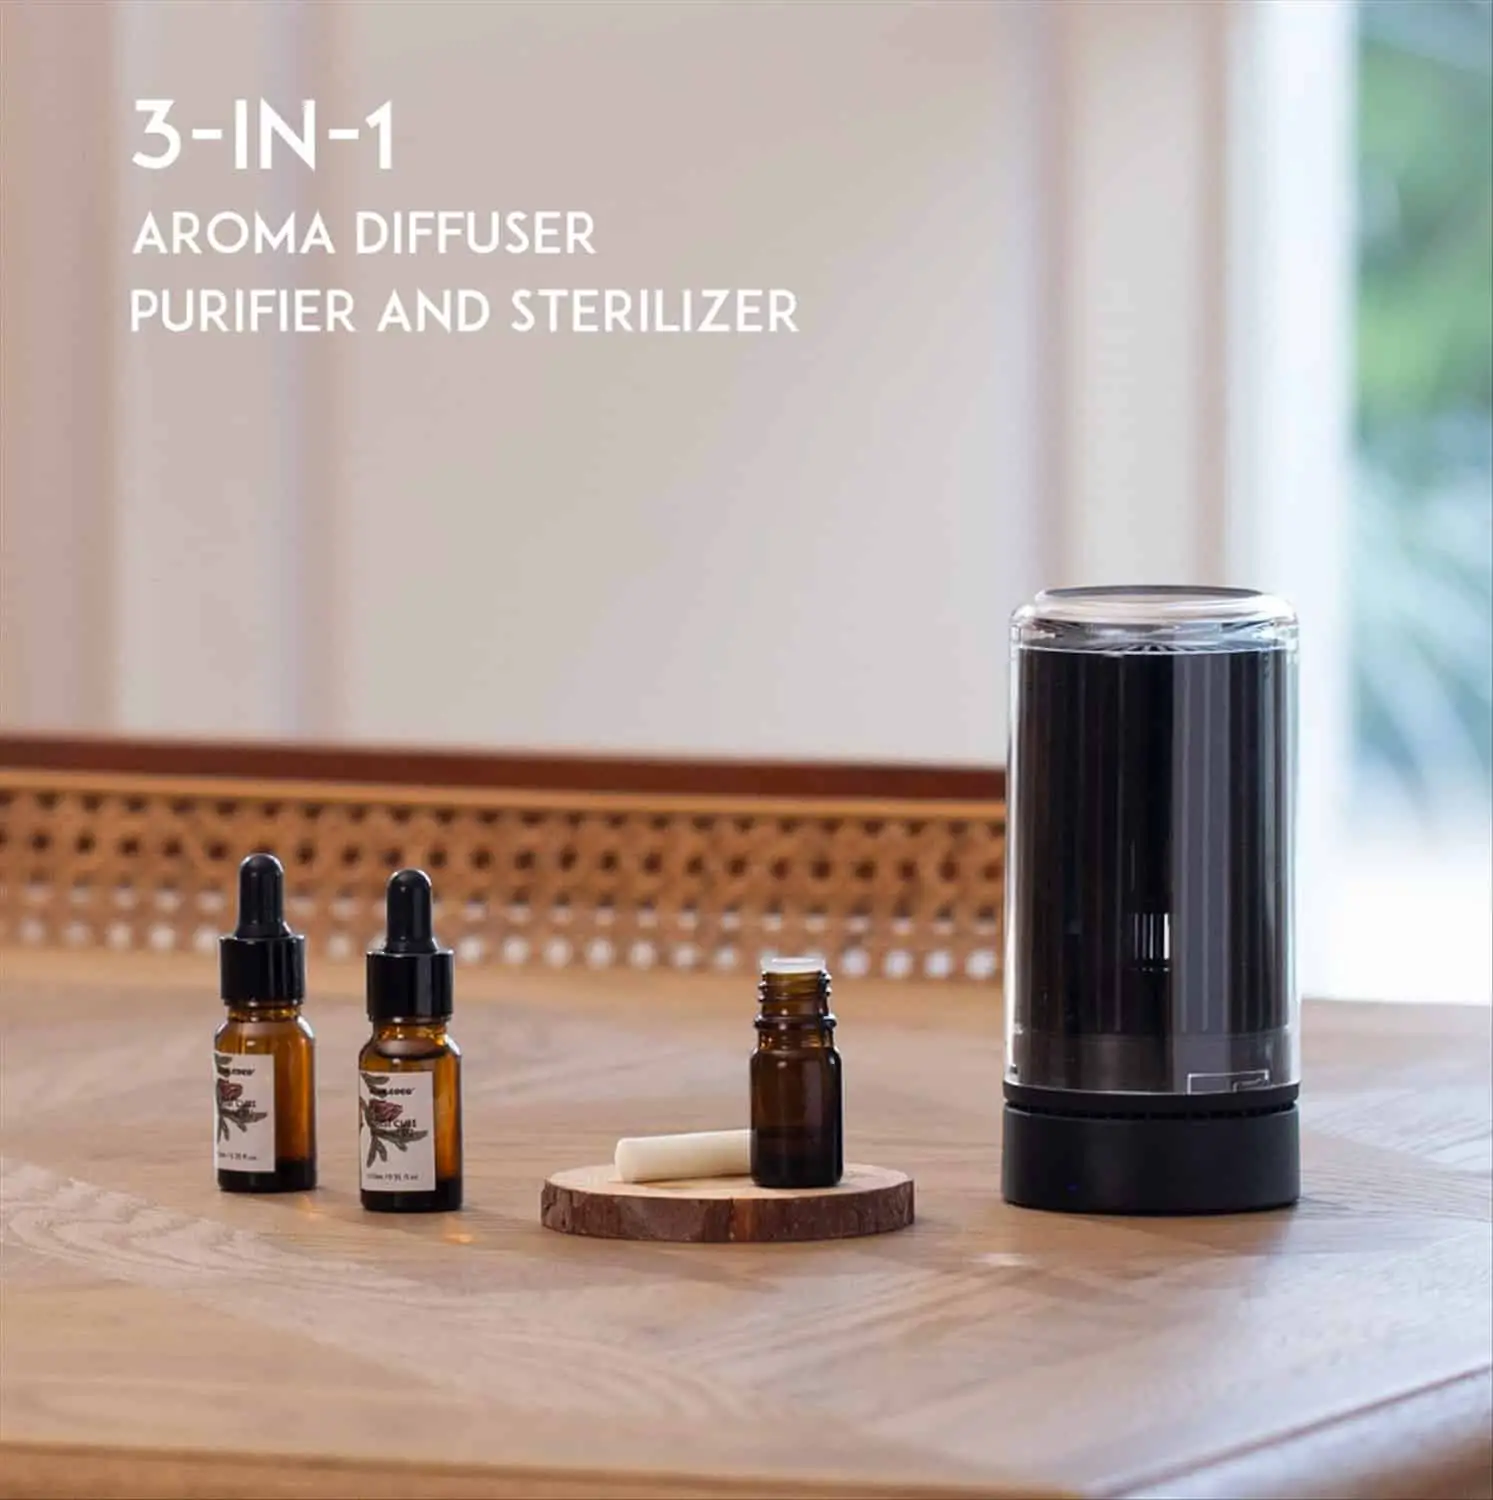 Upgrade Your Air Quality with This Portable Air Purifier, Now at an Unbeatable Price | Shop Now and Save Big